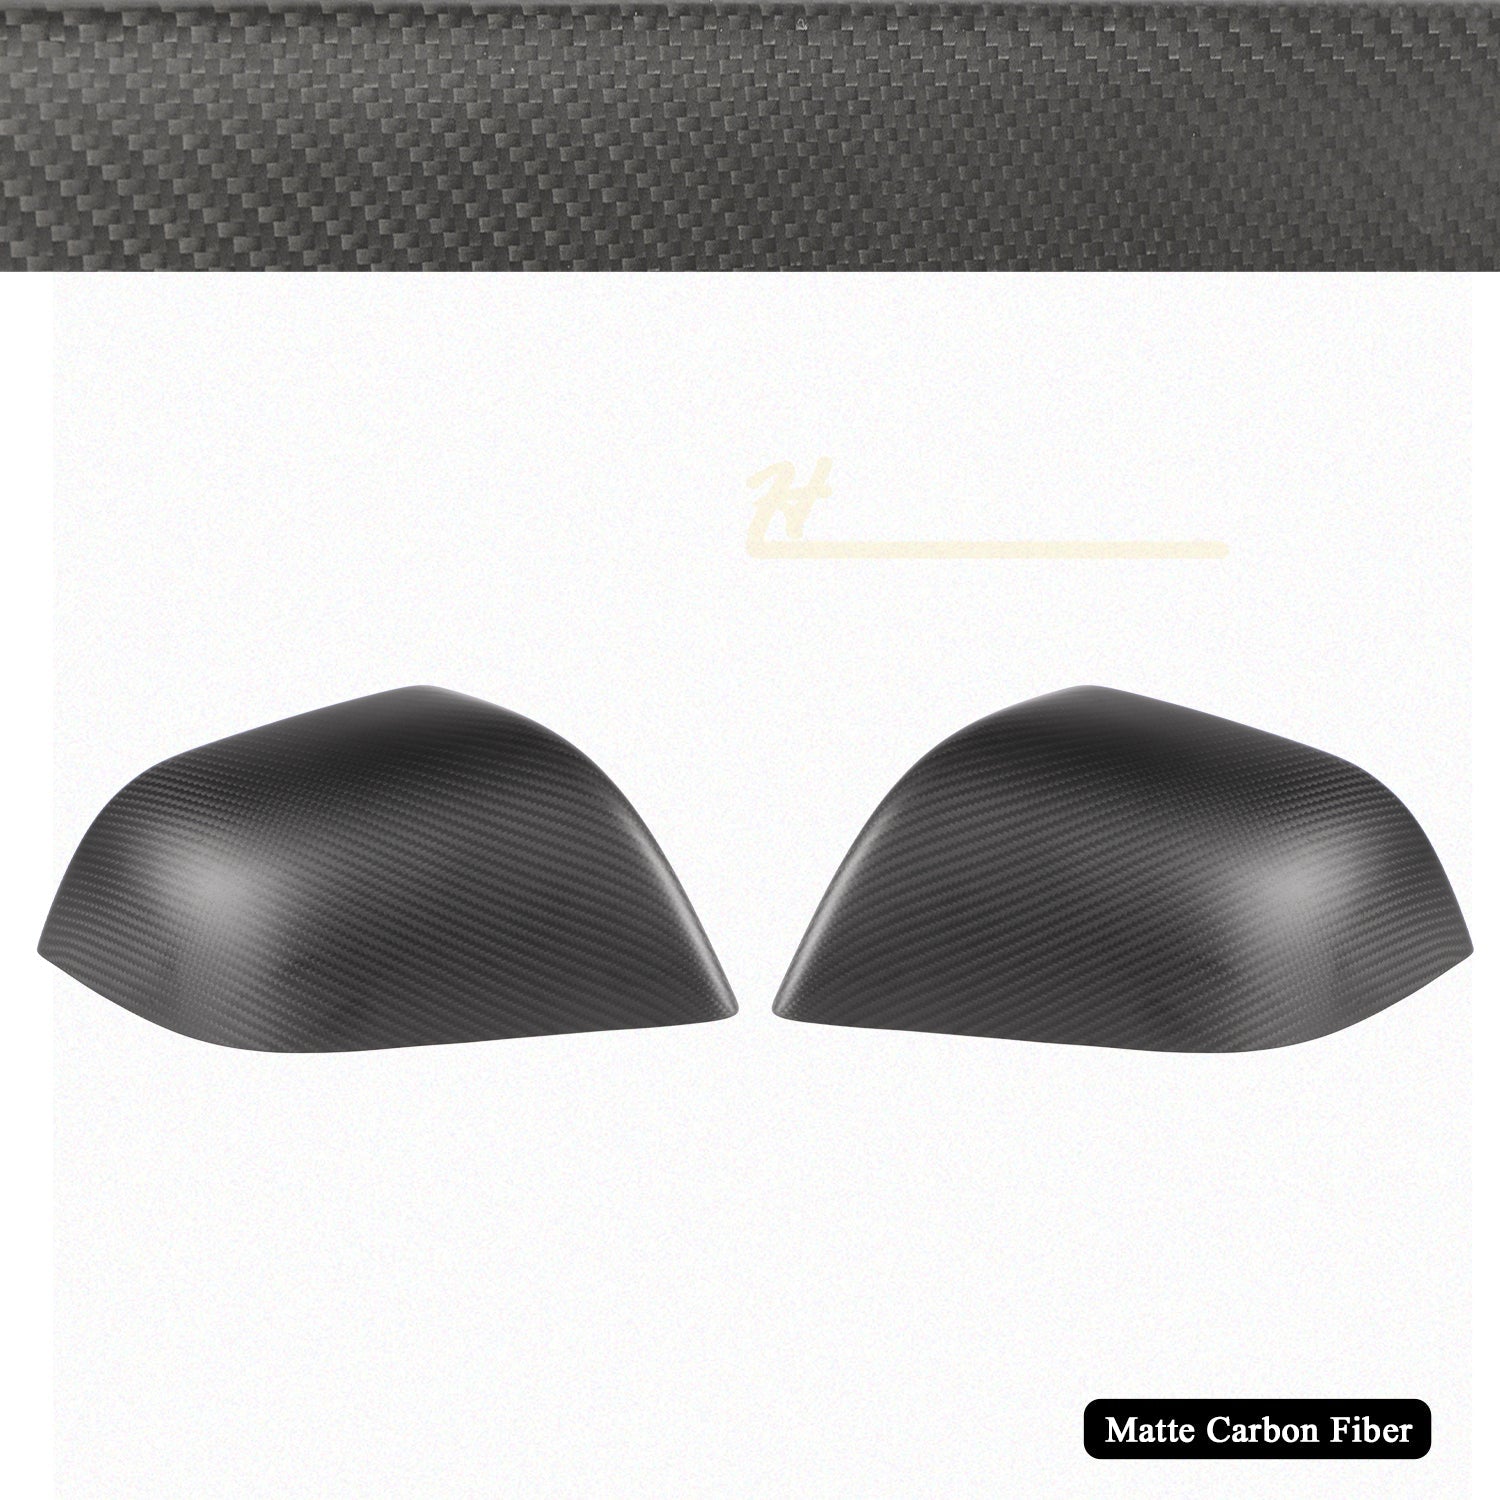 Model Y/3 Real Carbon Fiber Rearview Mirror Cover